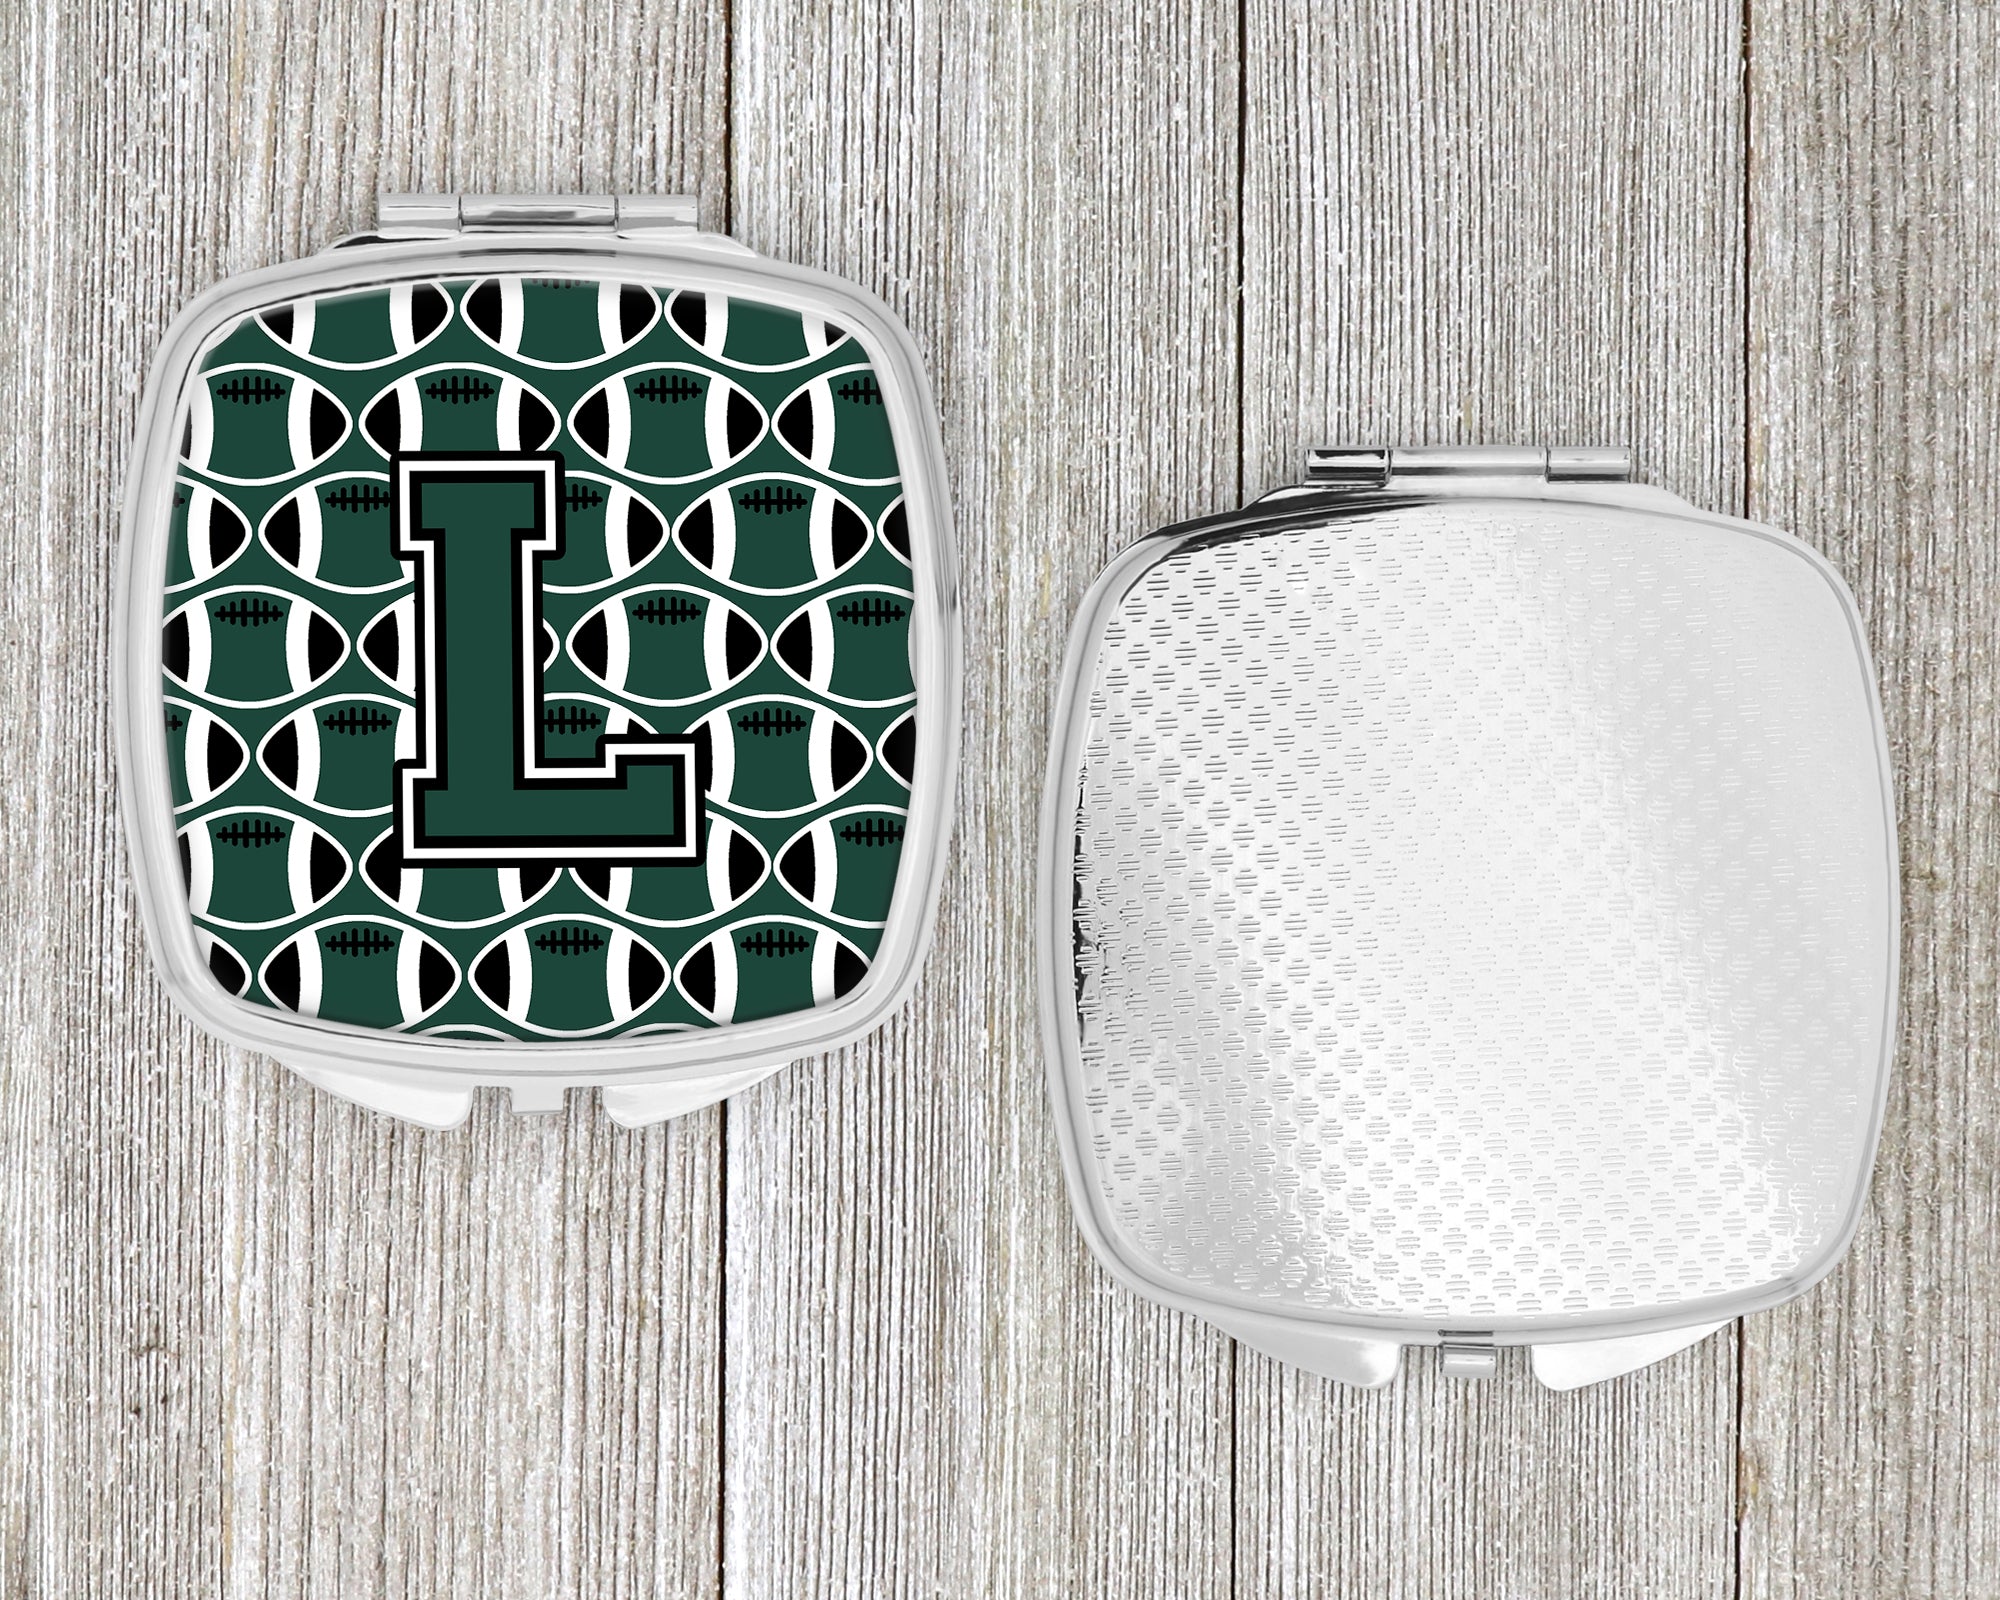 Letter L Football Green and White Compact Mirror CJ1071-LSCM